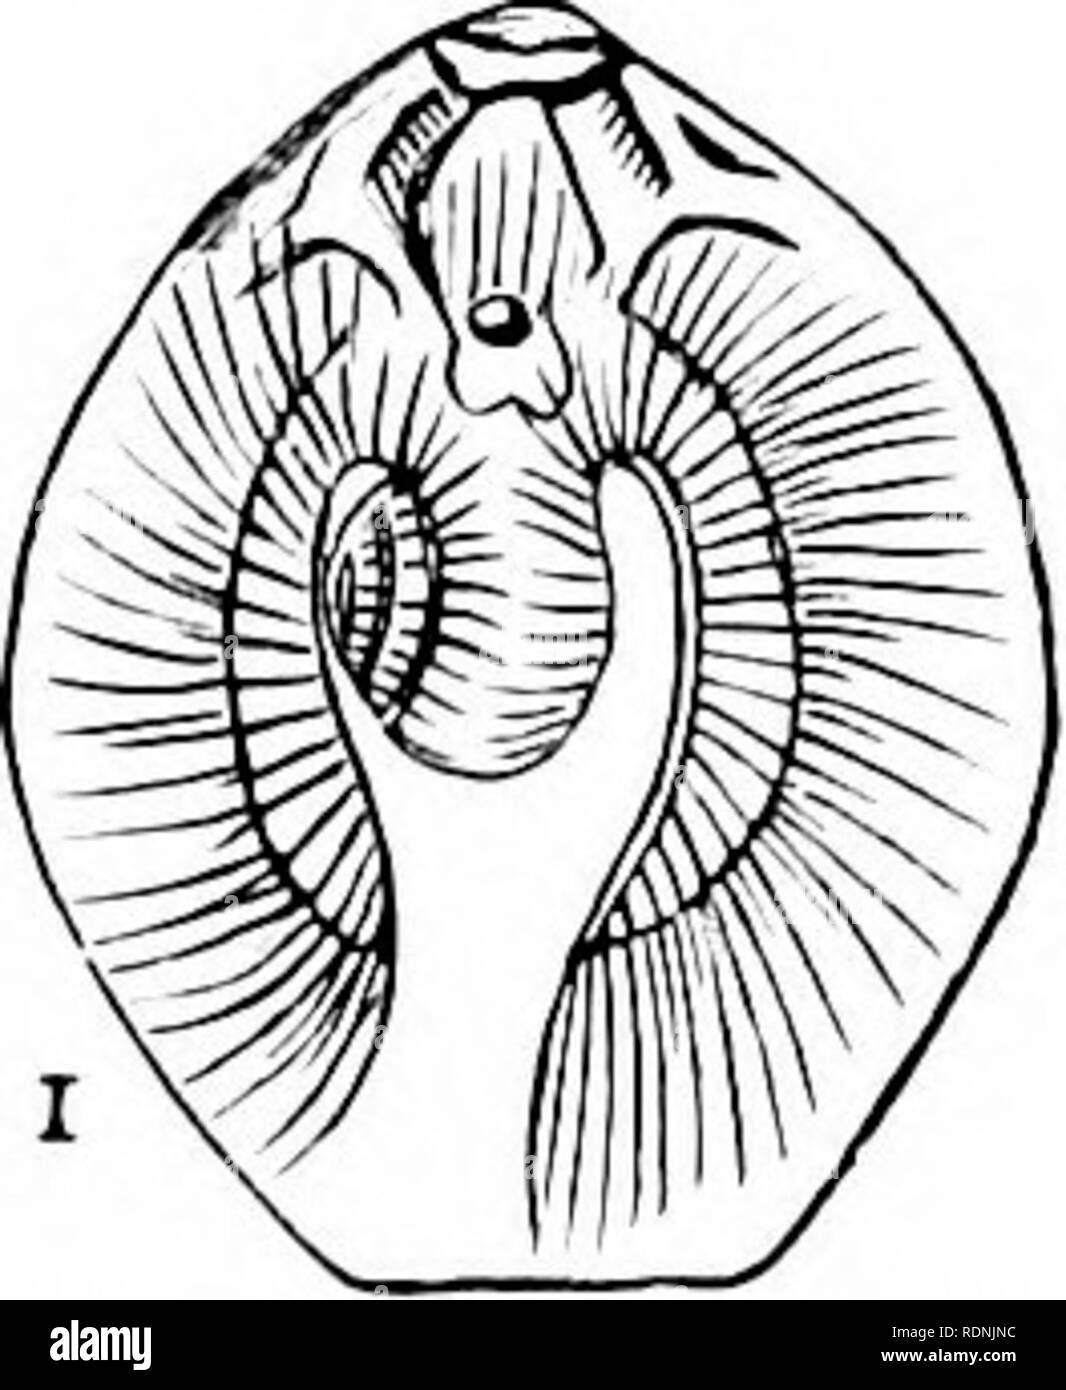 . Text-book of zoology for junior students. Zoology. Fig. 12fi.riiaf;i-arii uf tljc struc-tiire of a tyiiifal Mollusc (the Common Wlielk). / The iiiuscitlar &quot; A.ot &quot; ; op Tlie o]&gt;»aciiliiiii ; t One of the tentacles, or feelers, with an eye at its base; j) The fti-olaiseis, reti'acted, with the mouth at its extremity; oe Gullet; g Stomach; i Intestine, teniiinatinr^ in the anus; nn Salivary glands; I The liver an&lt;l the &lt;ivary; /(. Tlie heart; ^e The yill, contained in a hood of the mantle; s lircalliiri^'-l iilie or si|ilion : r and c The main m-rve i;anL;lia, the cme aljii Stock Photo